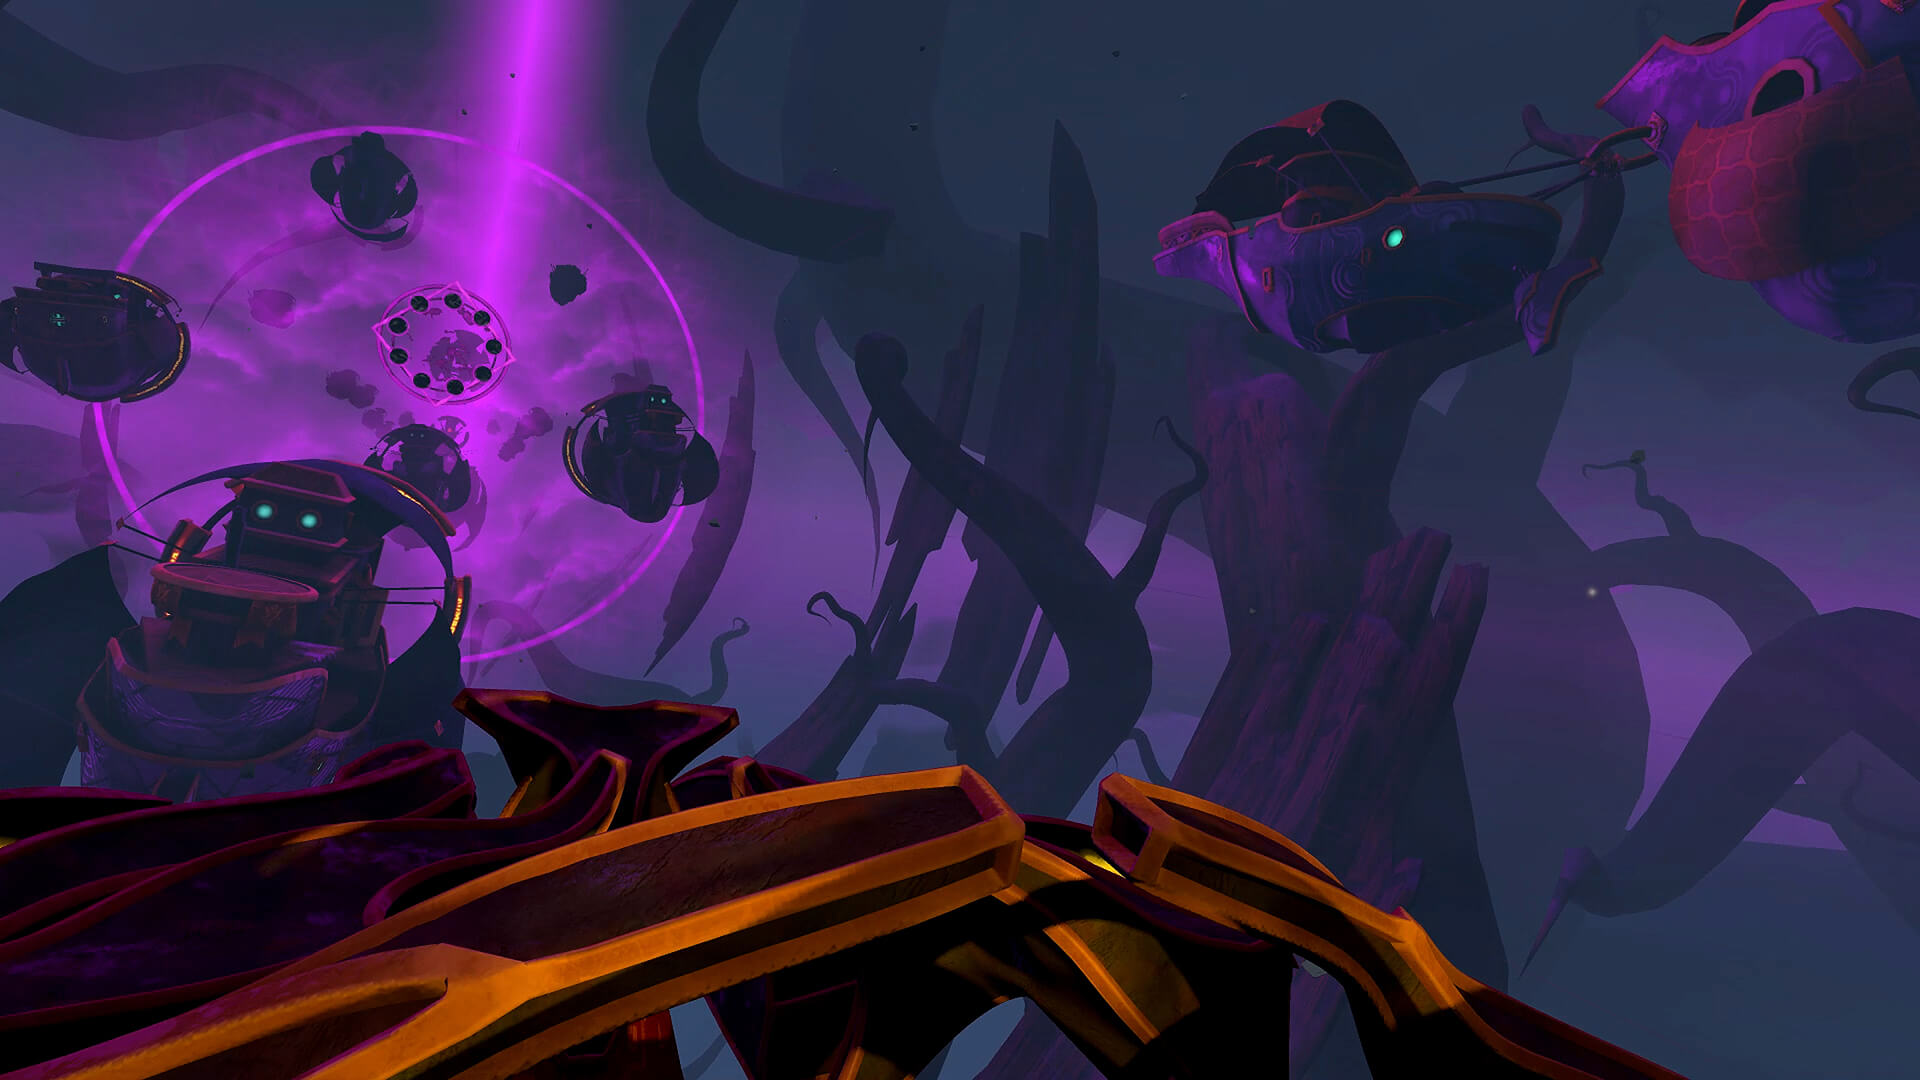 Action, Action & Adventure, adventure, Agharta Studio, Apocalipsis: The Tree of the Knowledge of Good and Evil, PlayStation VR, PS4, PS4 Review, PSVR, Stardust Odyssey, Stardust Odyssey Review, strategy